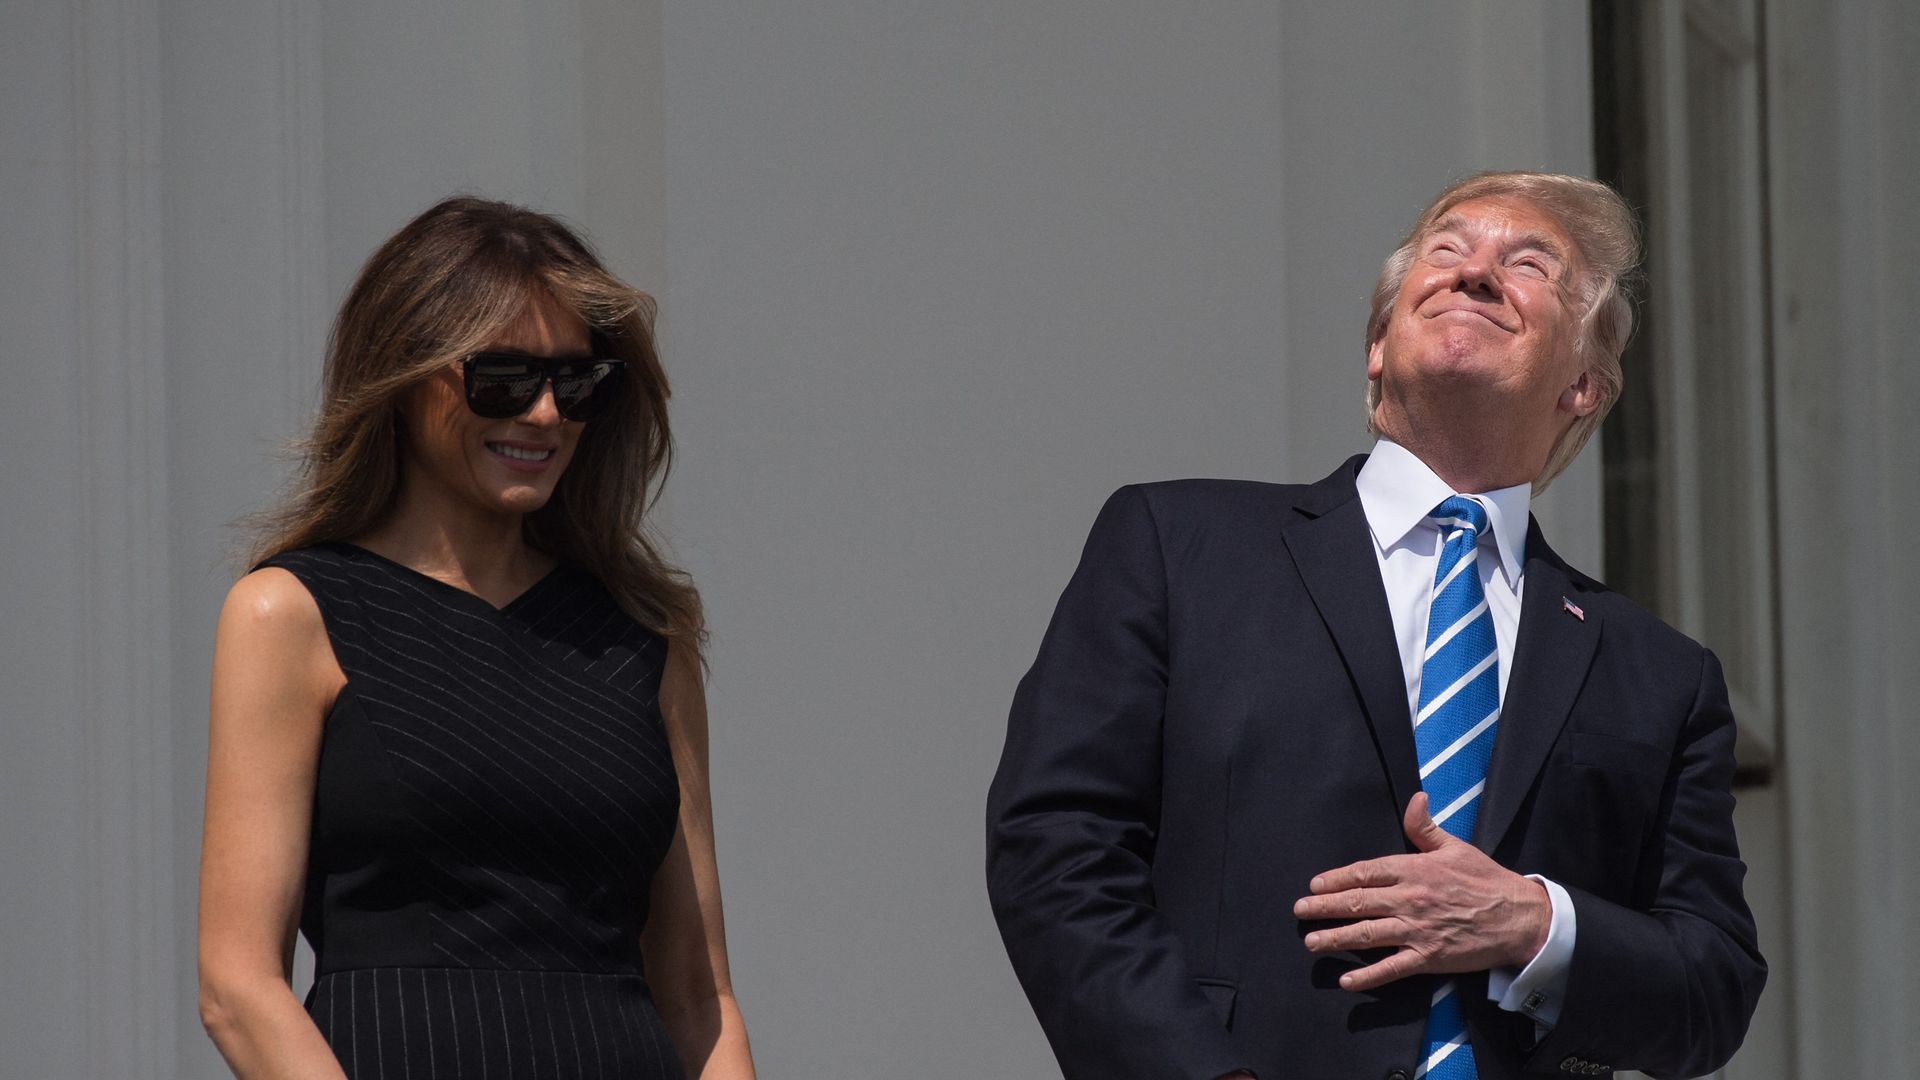 US President Donald Trump and First Lady Melania Trump look up at the partial solar eclipse from the balcony of the White House in Washington, DC, on August 21, 2017